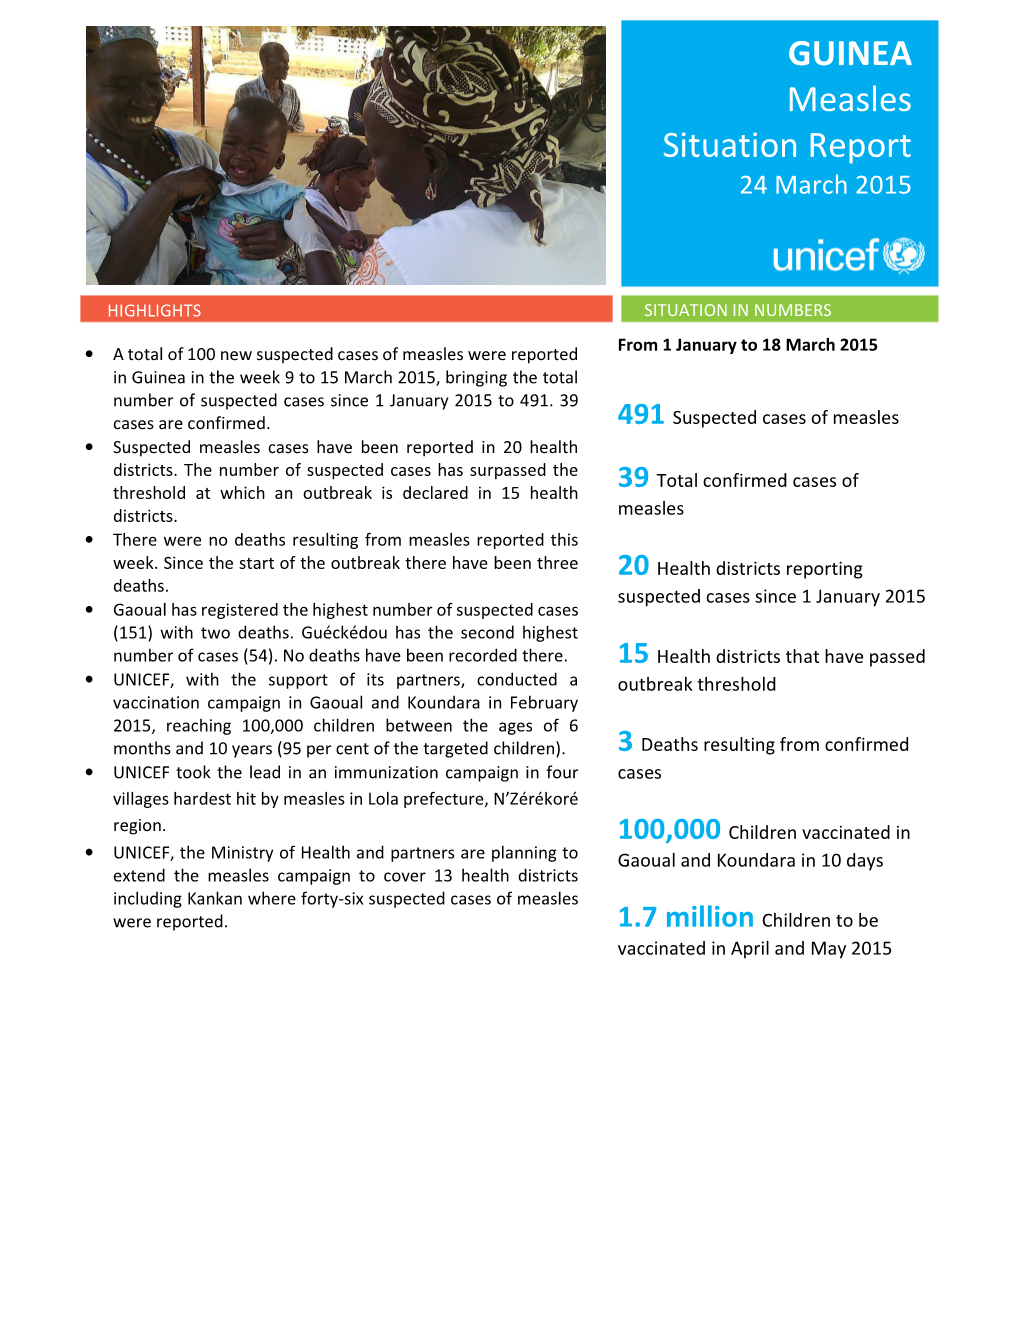 GUINEA Measles Situation Report 24 March 2015